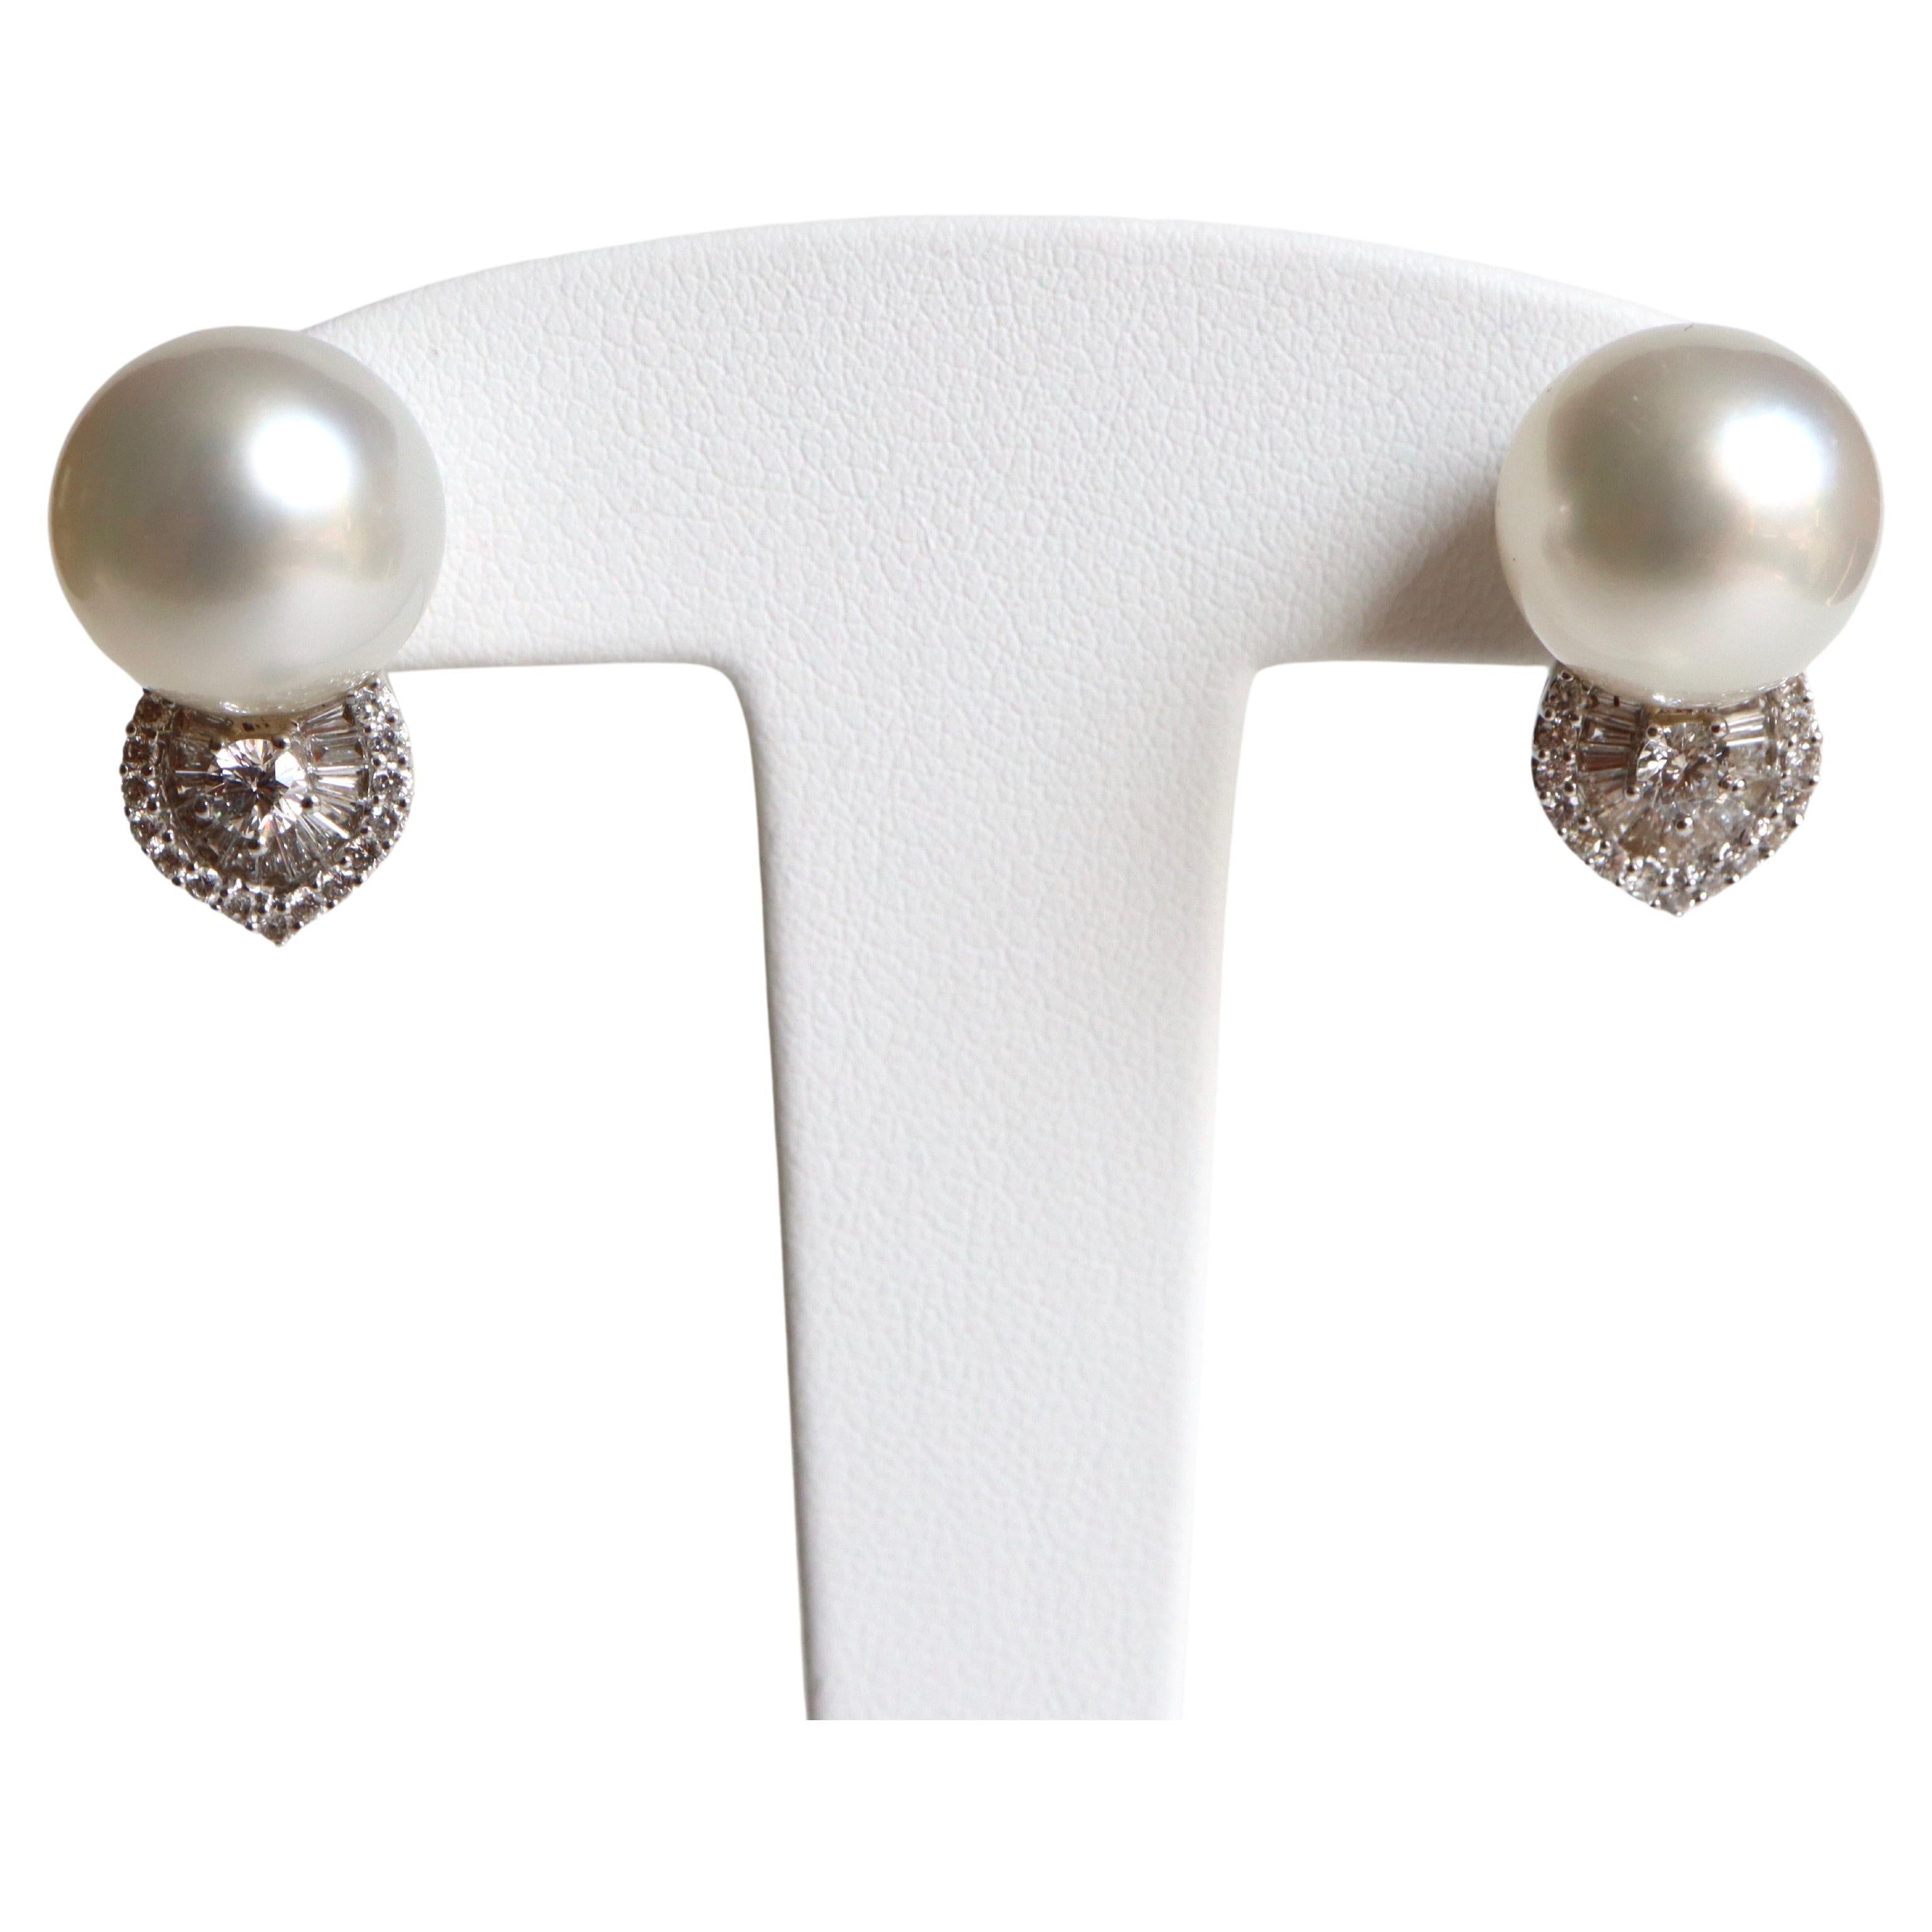 Pearl Clip Earrings 18 Carat White Gold Set with Diamonds